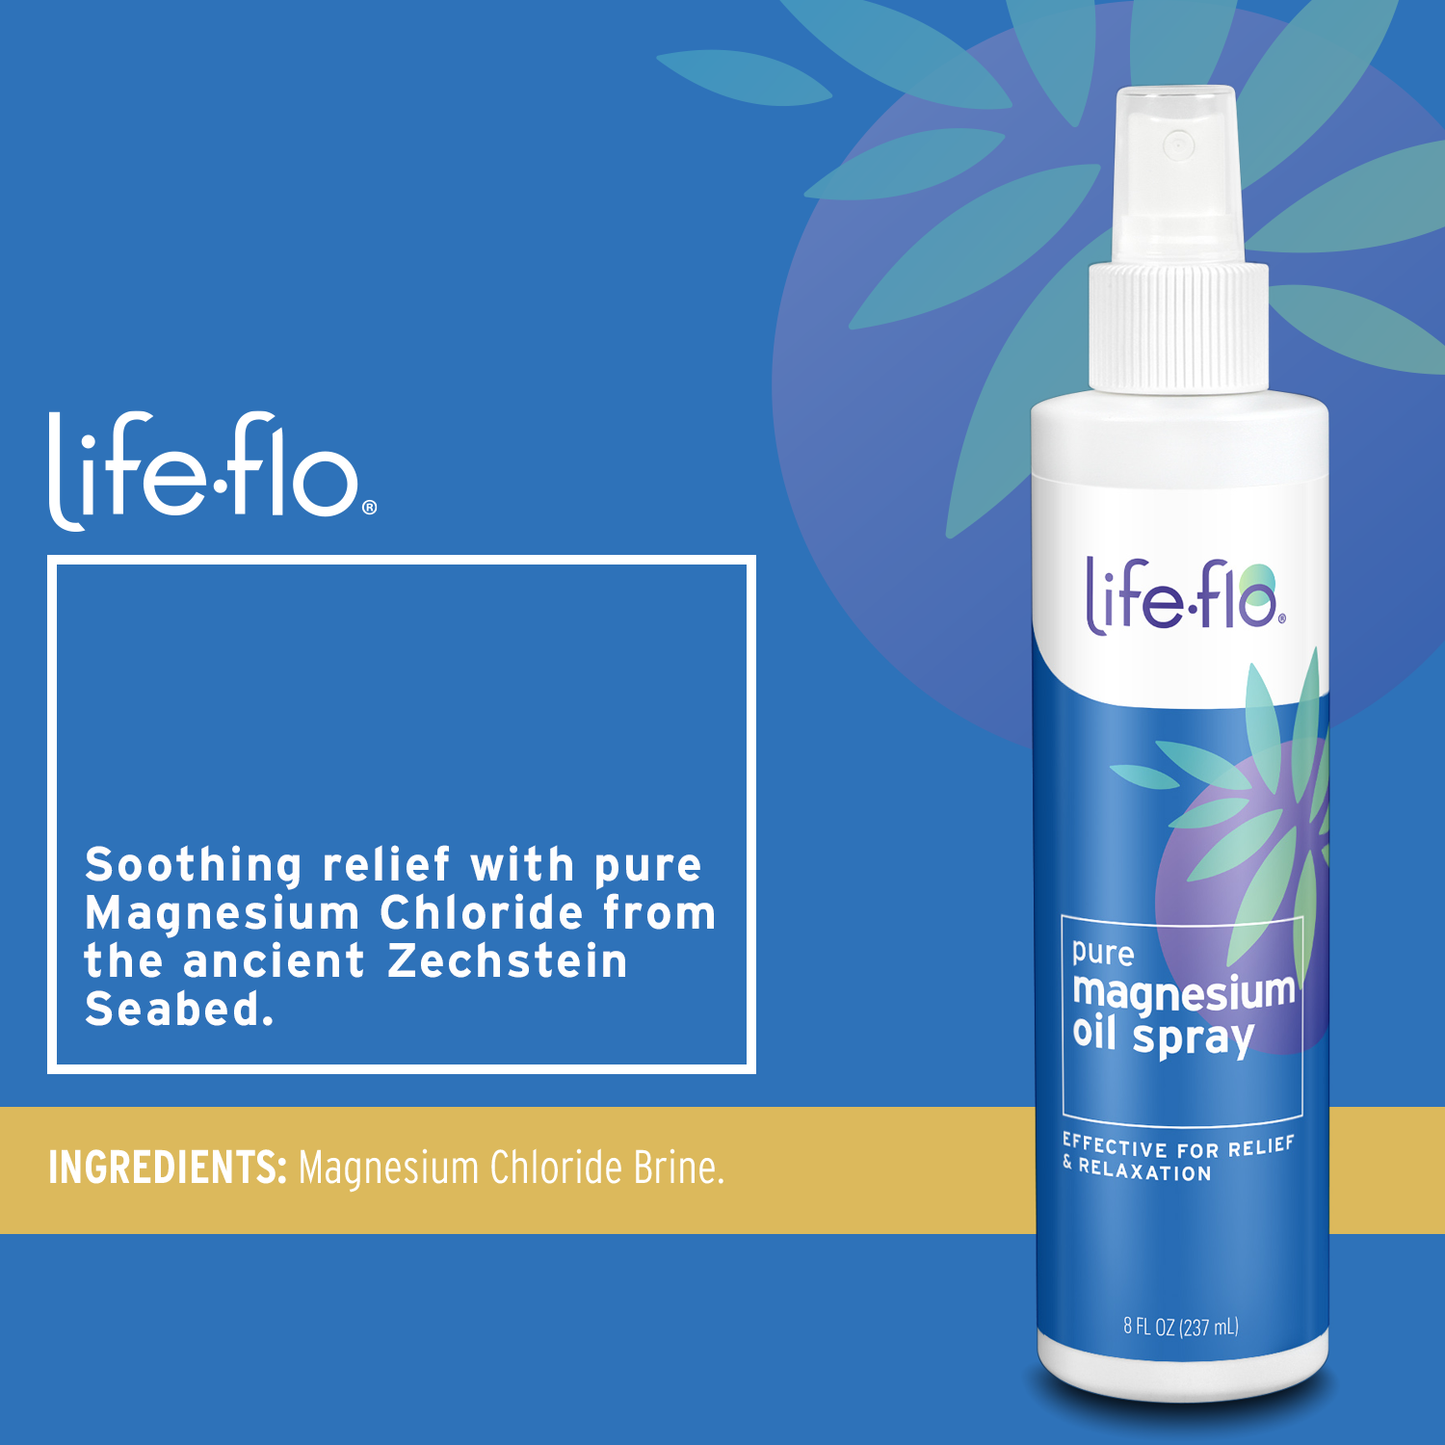 Life-flo Magnesium Oil Night Spray, Soothing Magnesium Spray w/ Magnesium Chloride from Zechstein Seabed and Lavender Oil, Calms and Relaxes Body and Mind, 60-Day Guarantee, Not Tested on Animals (8 Fl Oz)